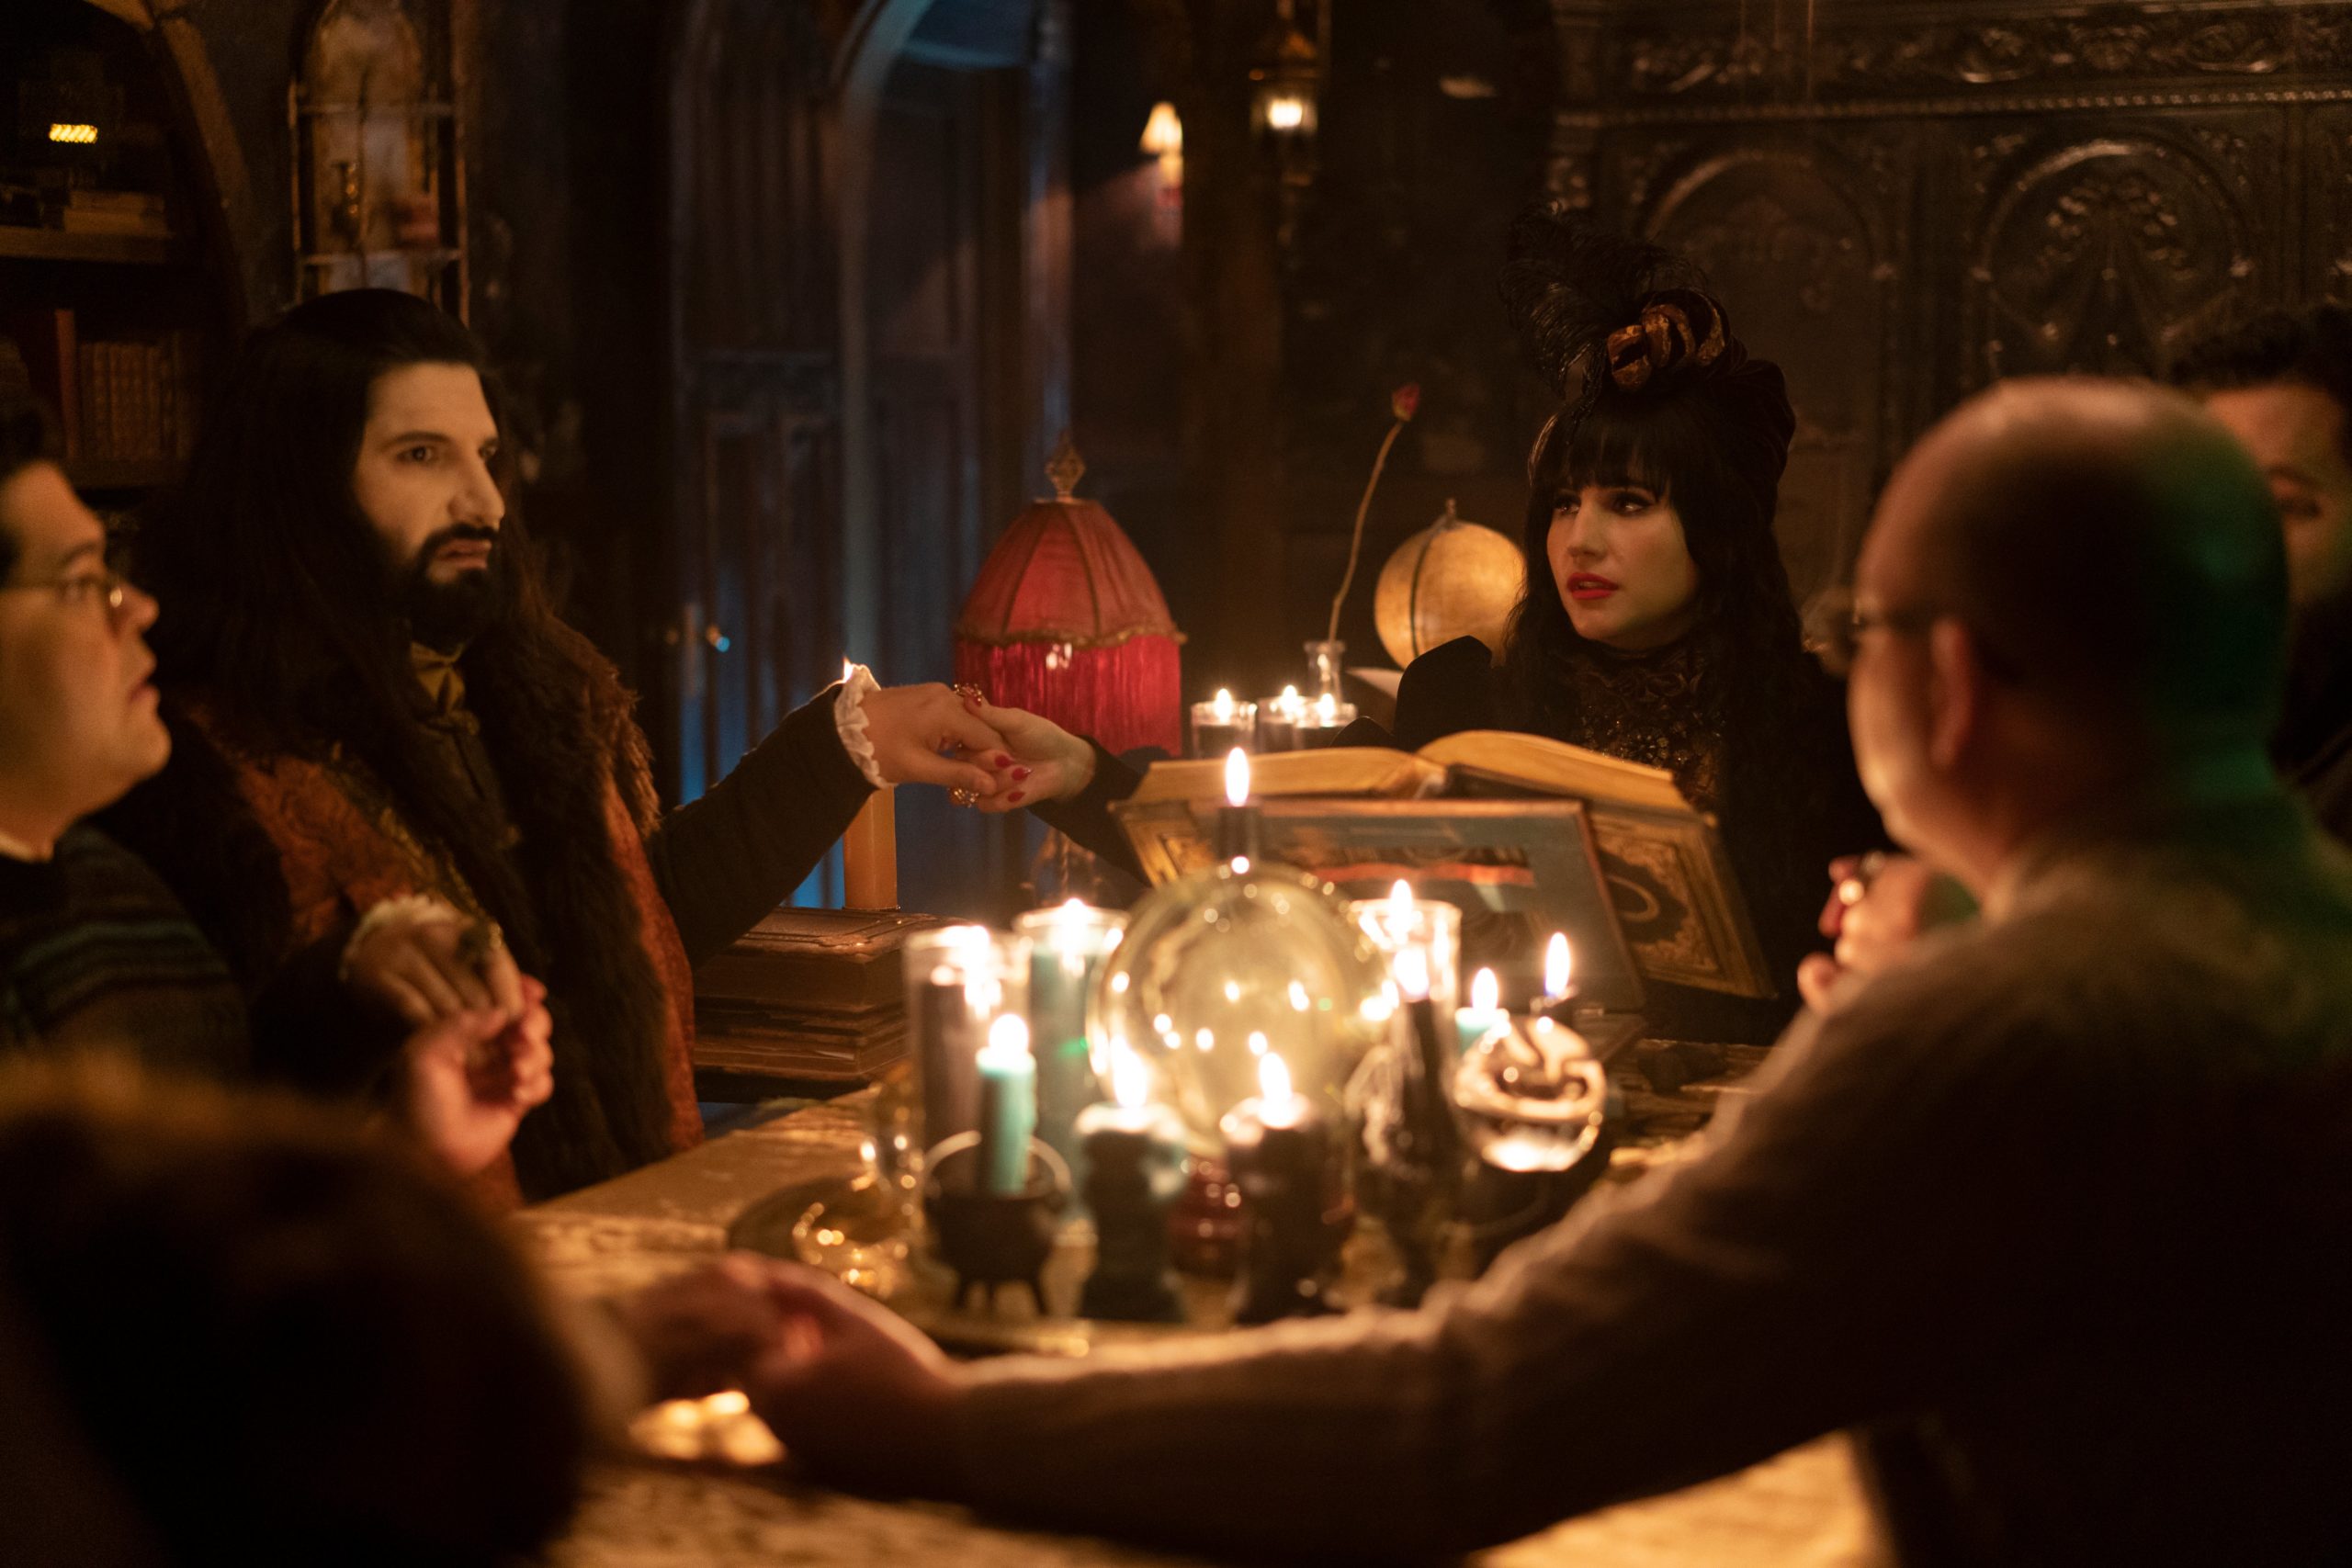 13 of What We Do in the Shadows’ Most Hilarious Season 2 Moments